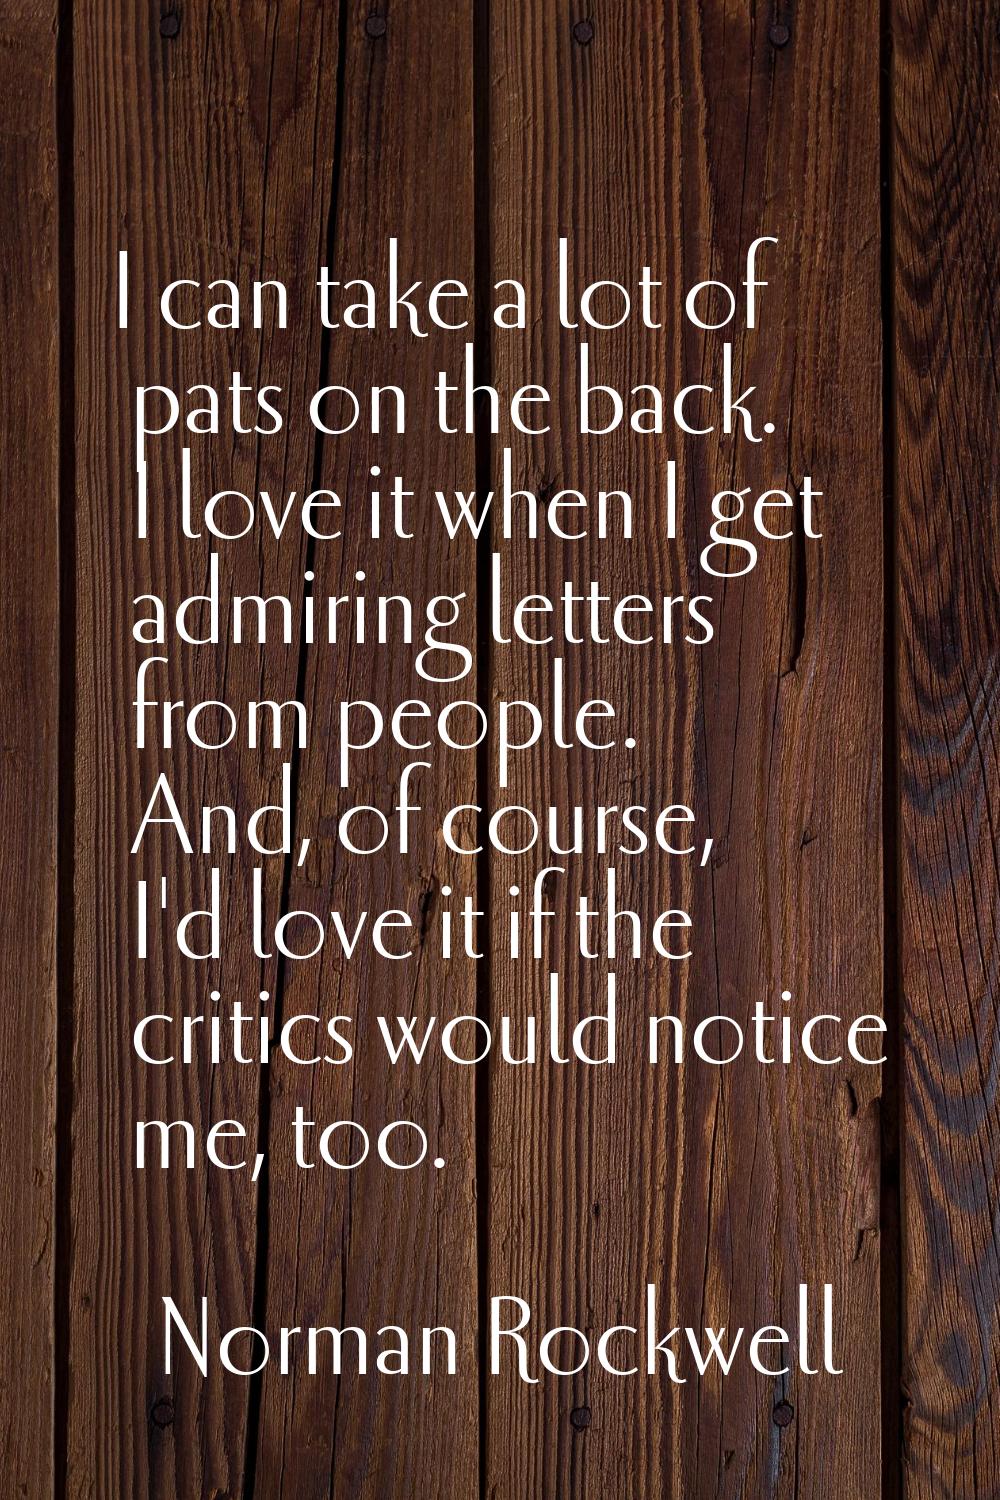 I can take a lot of pats on the back. I love it when I get admiring letters from people. And, of co